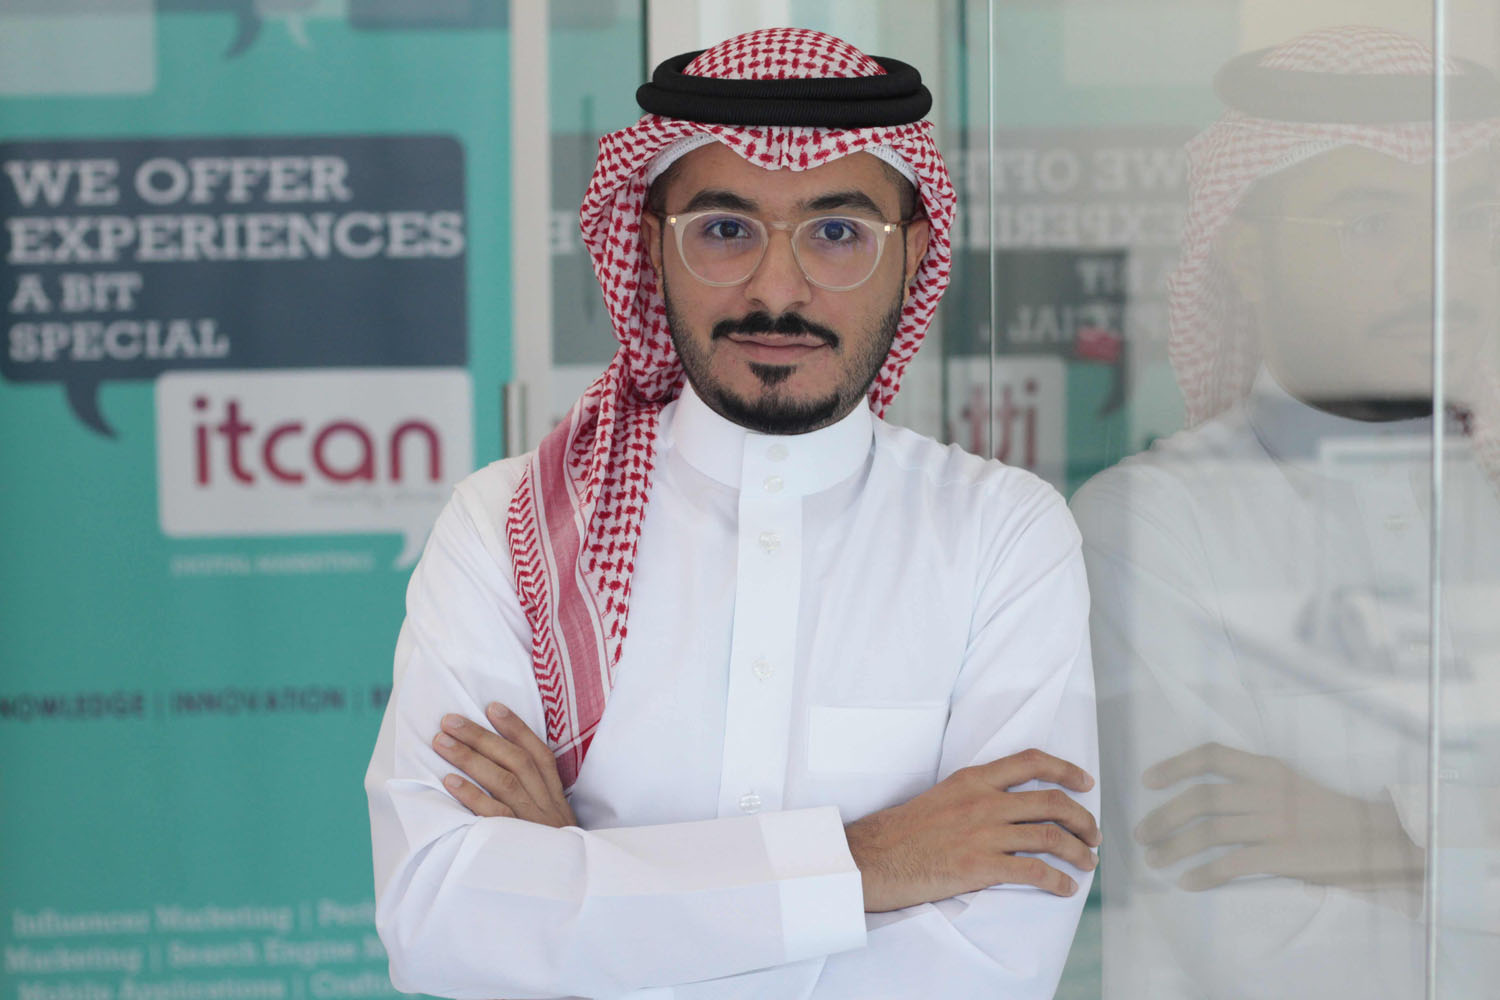 Mansour-Al-Thani-CEO-Co-founder-itcan.jpg